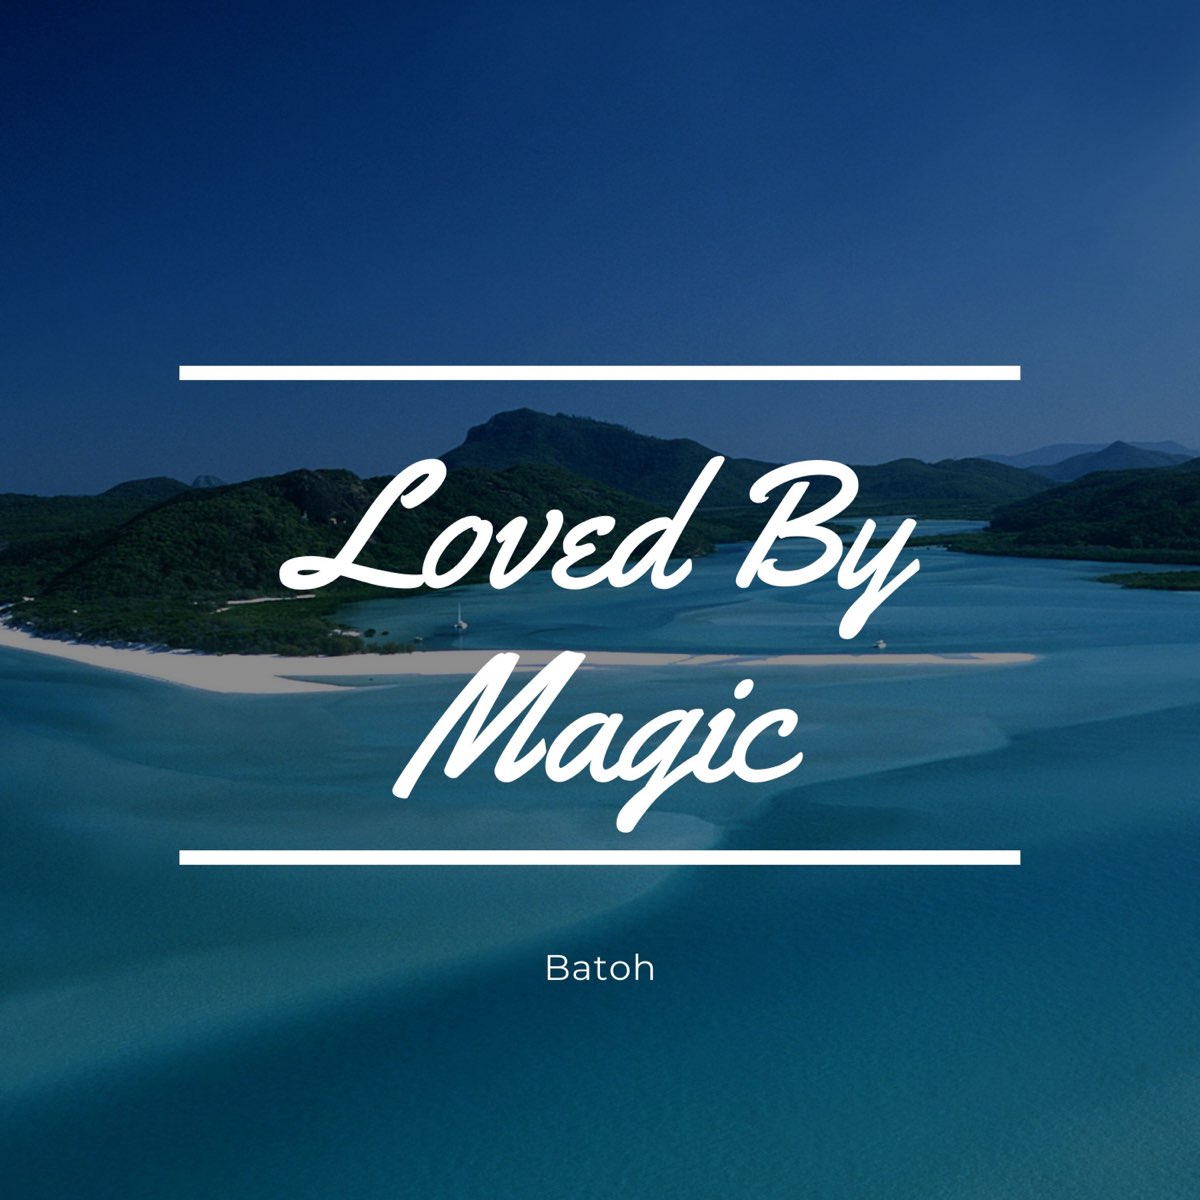 Loved By Magic by BATOH on Apple Music